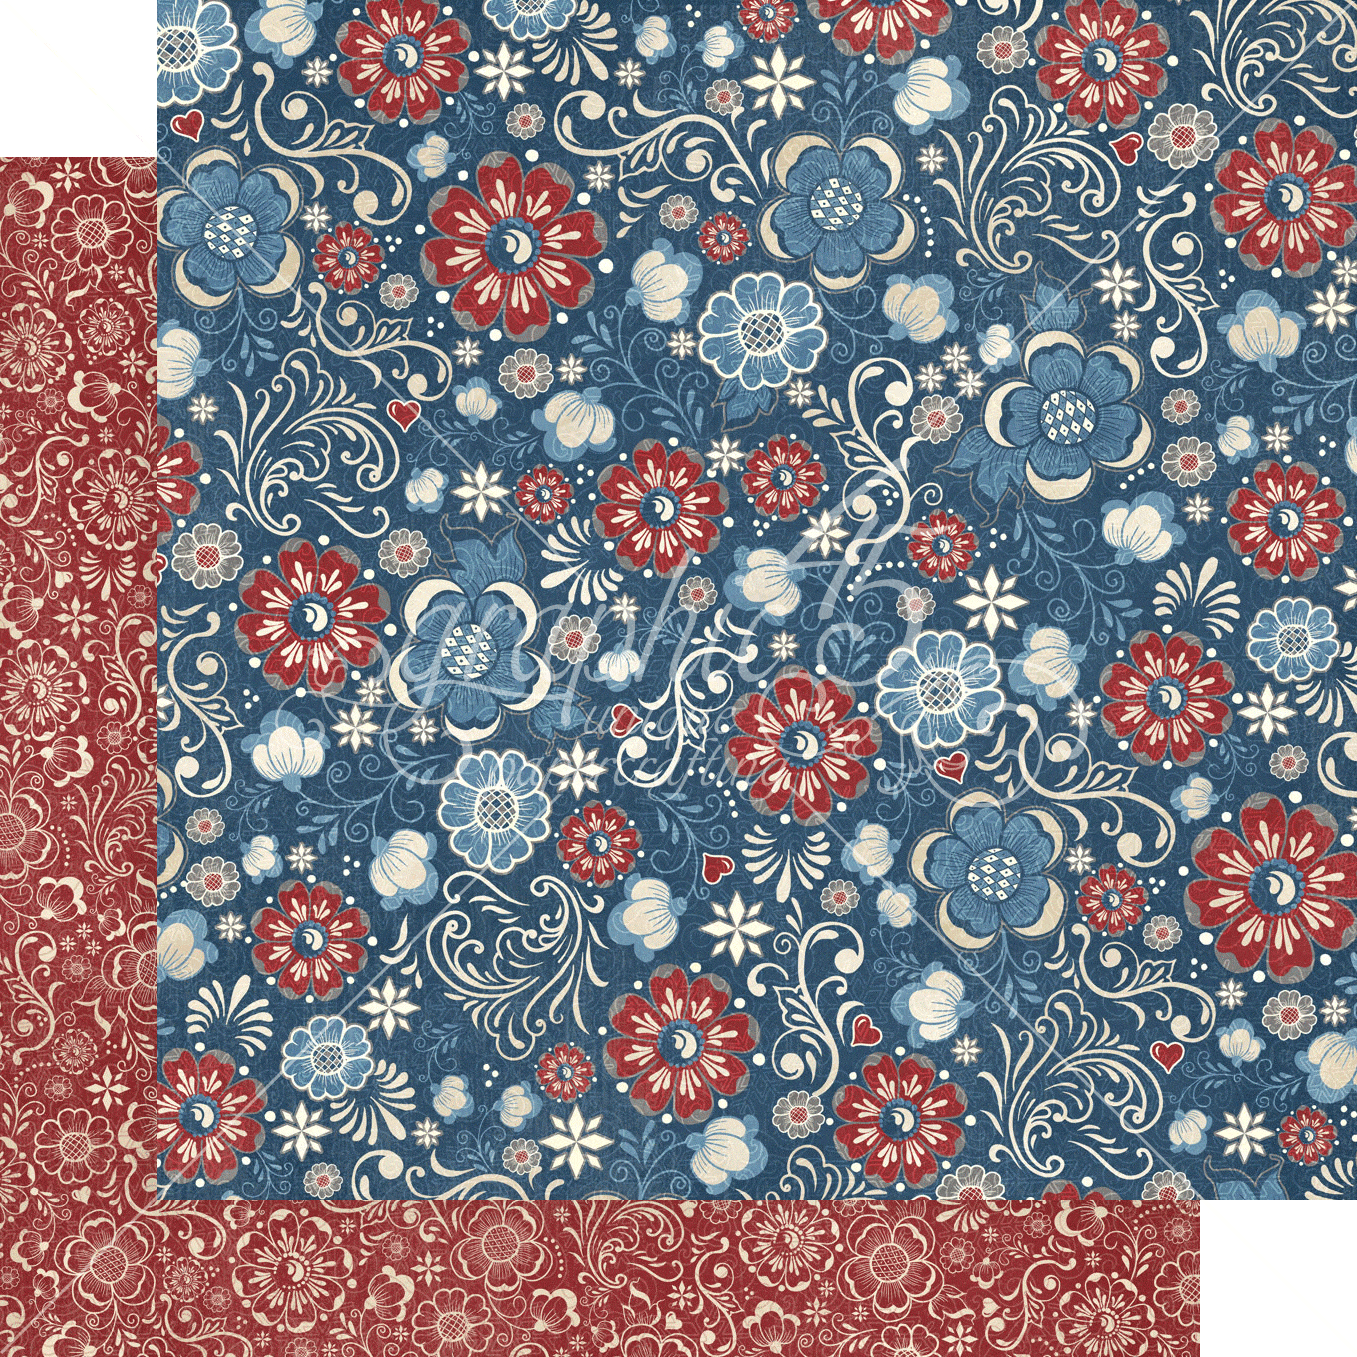 Let's Get Cozy Collection Beautiful Blizzard 12 x 12 Double-Sided Scrapbook Paper by Graphic 45 - Scrapbook Supply Companies